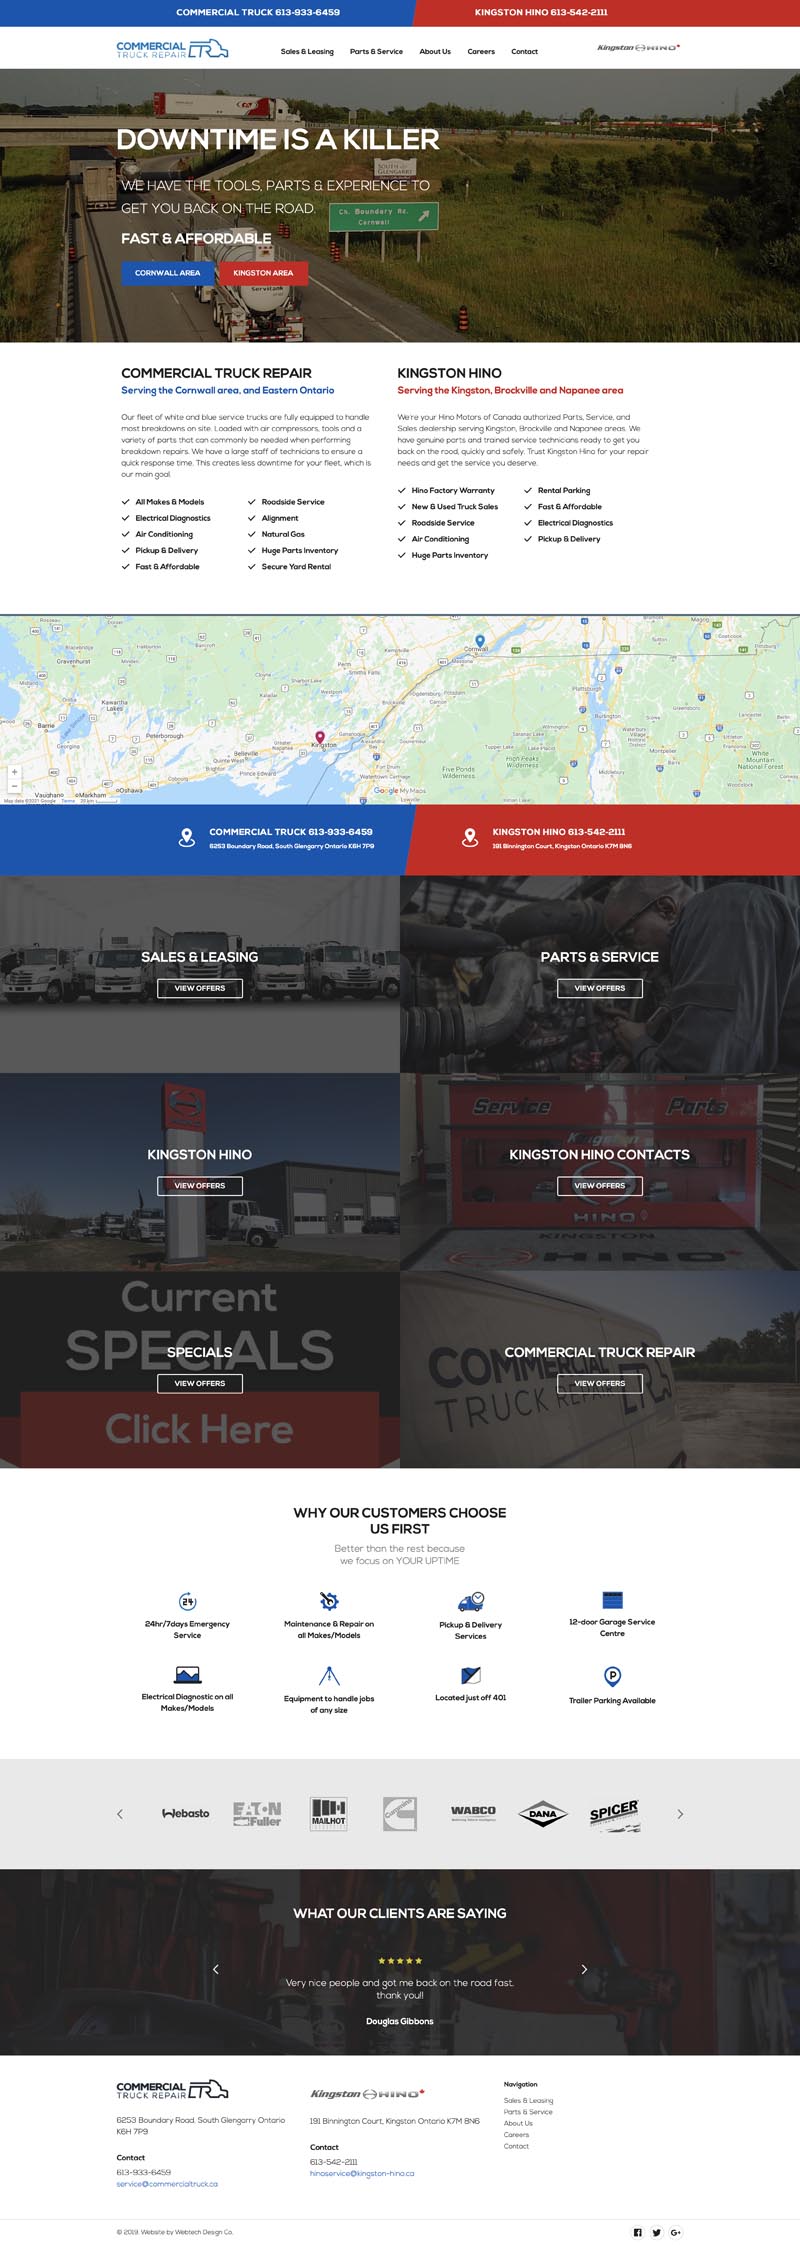 Cornwall and Kingston web design services for Commercial Truck business